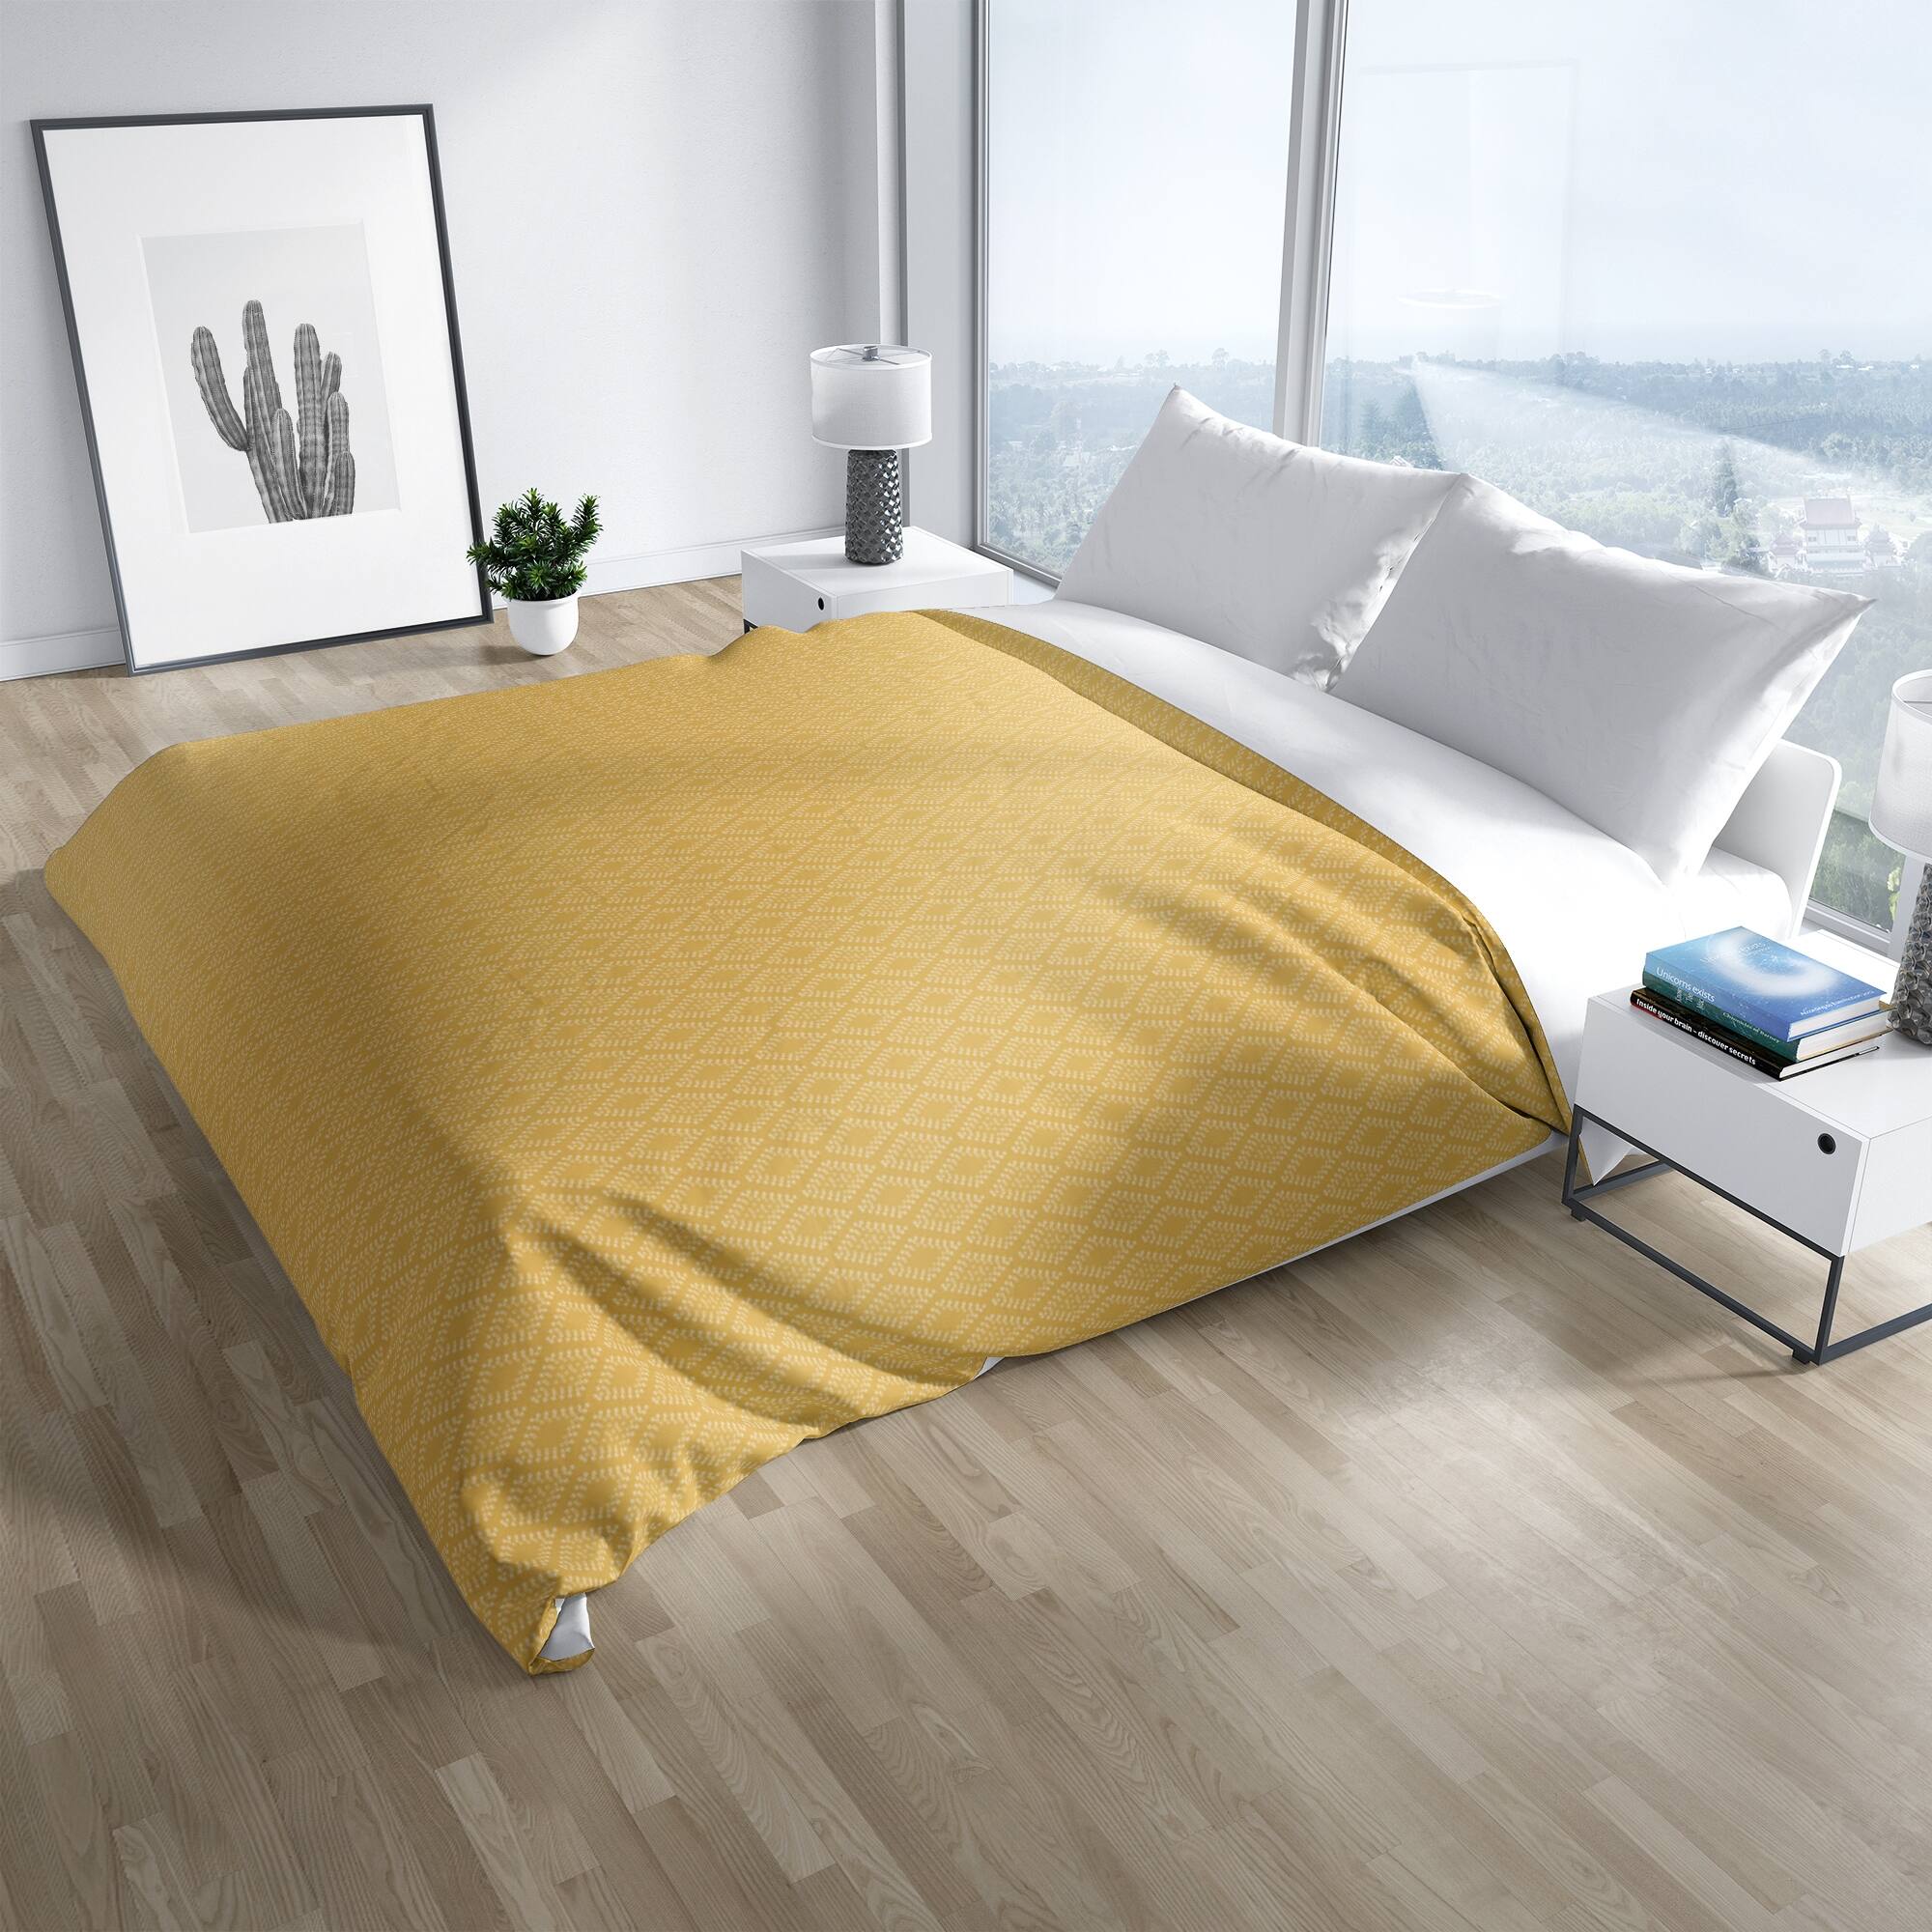 DOTTED GEO MUSTARD Duvet Cover By Kavka Designs